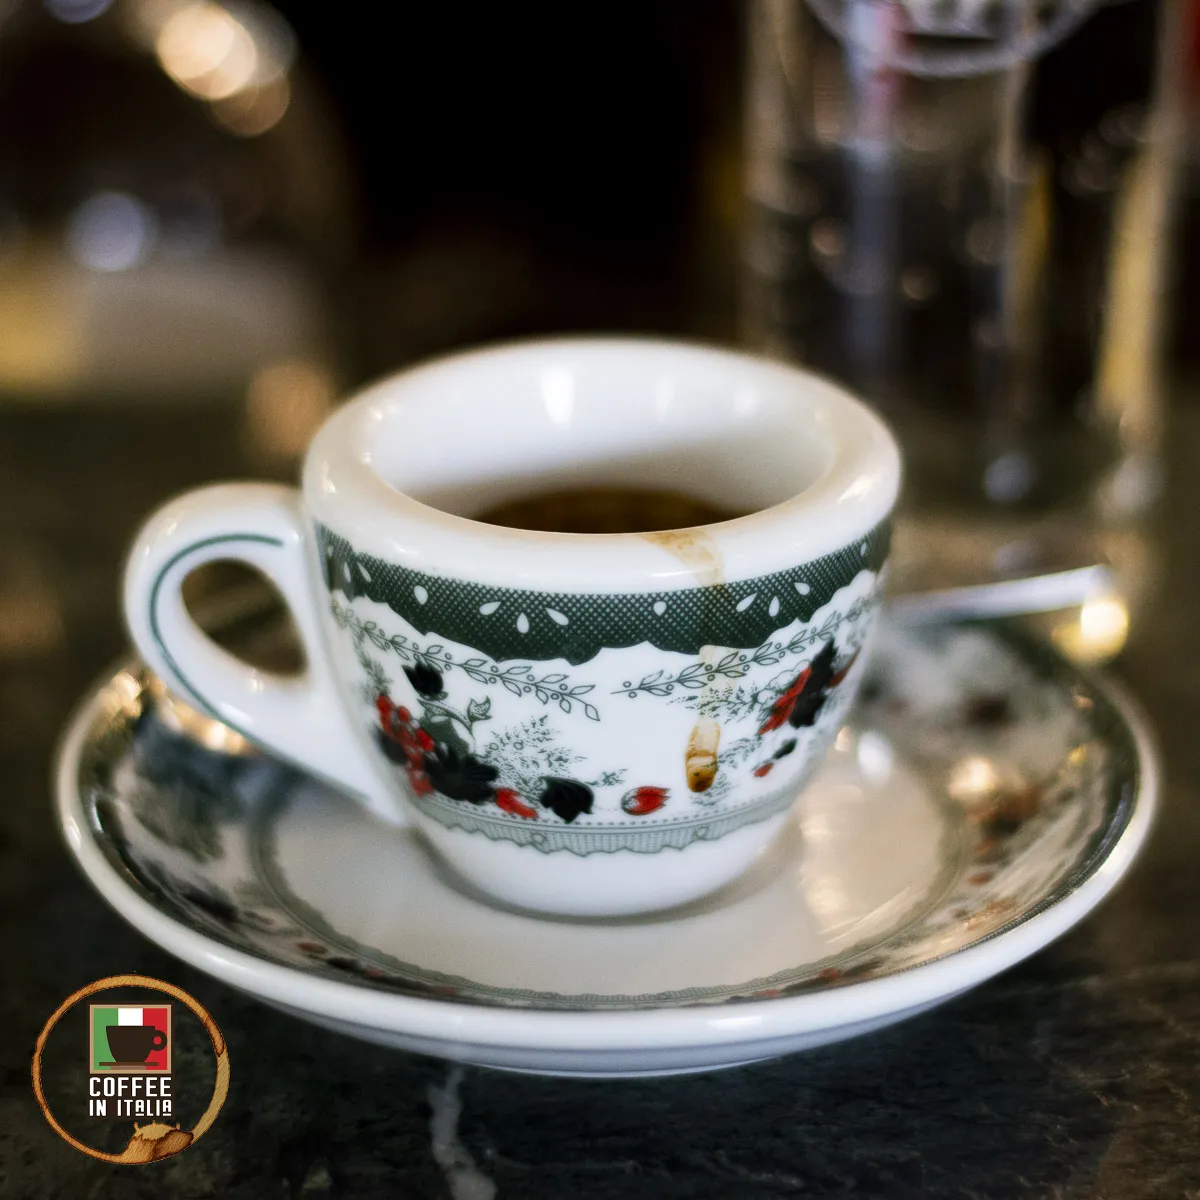 Coffee in Naples Italy - Gambrinus Cup